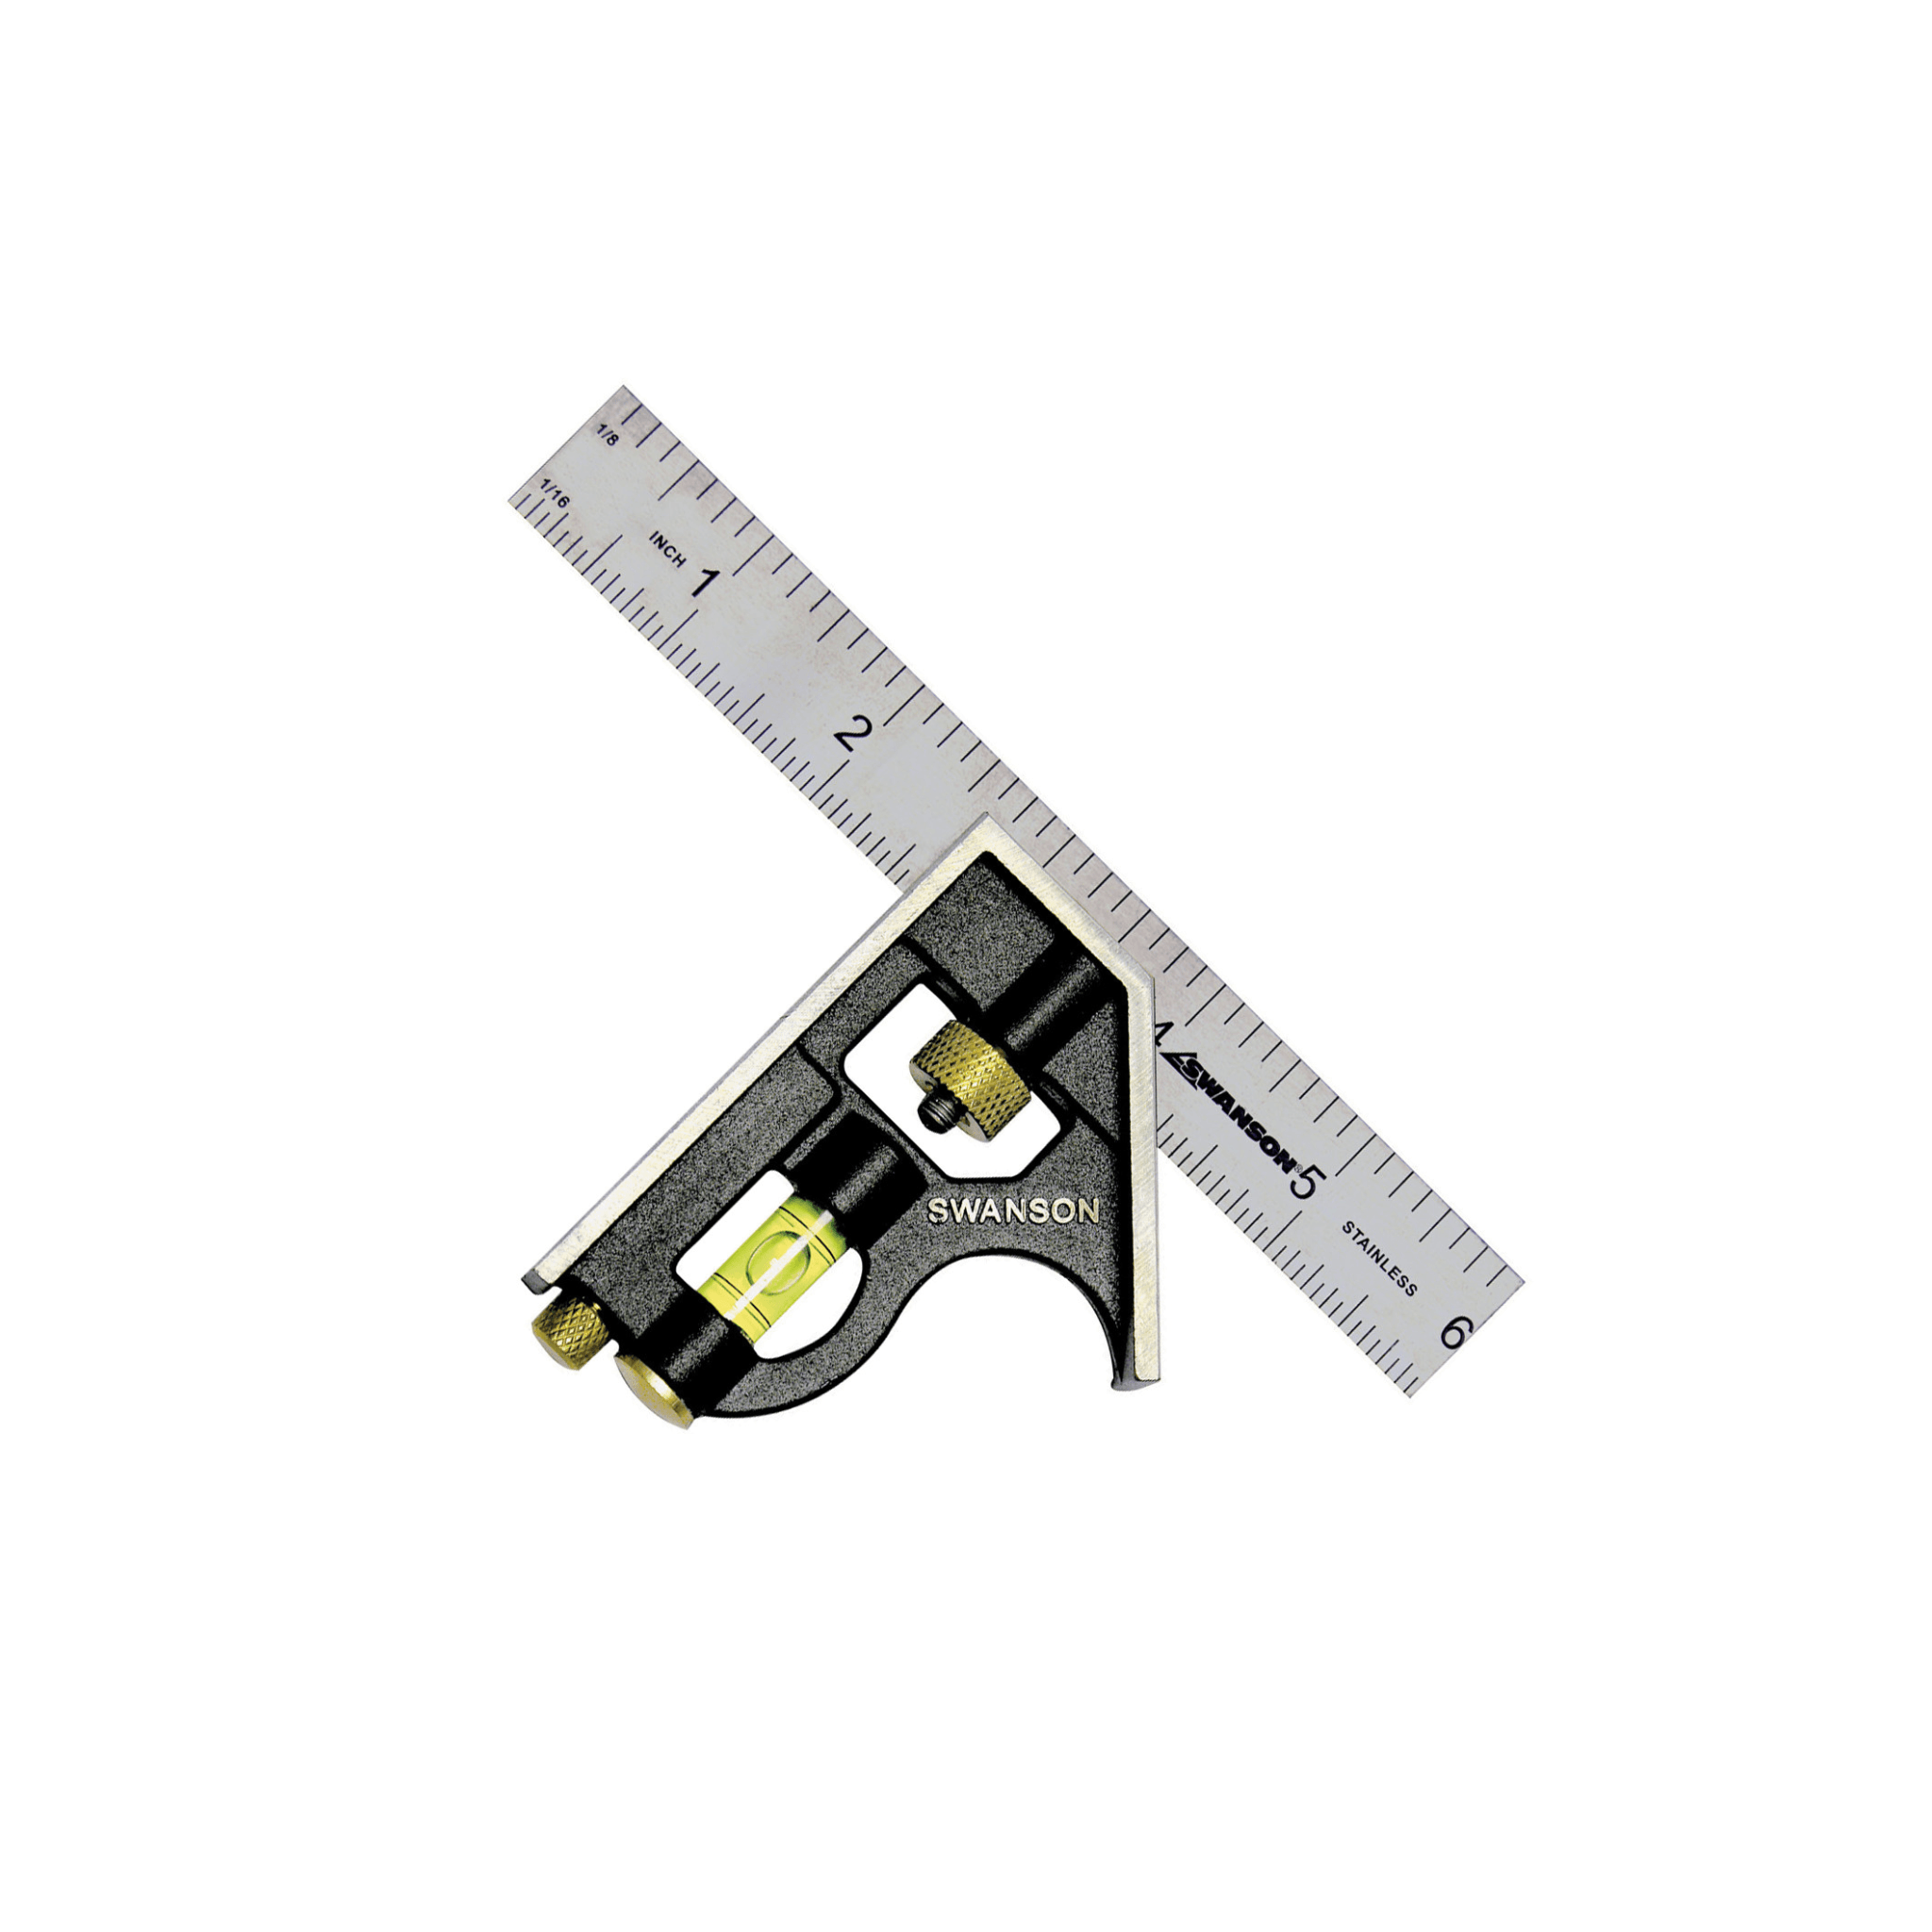 Swanson TC130 6 in. Pocket Combination Square - Direct Stone Tool Supply, Inc